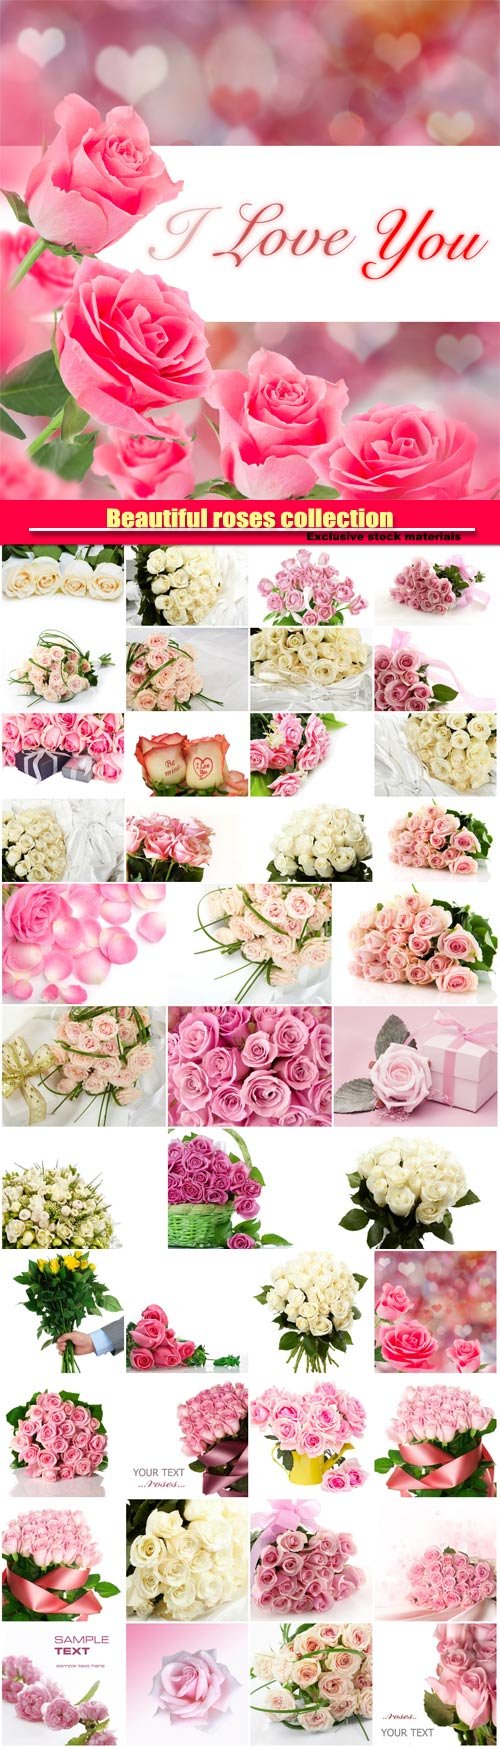 Beautiful pink and white roses, collection of romantic backgrounds